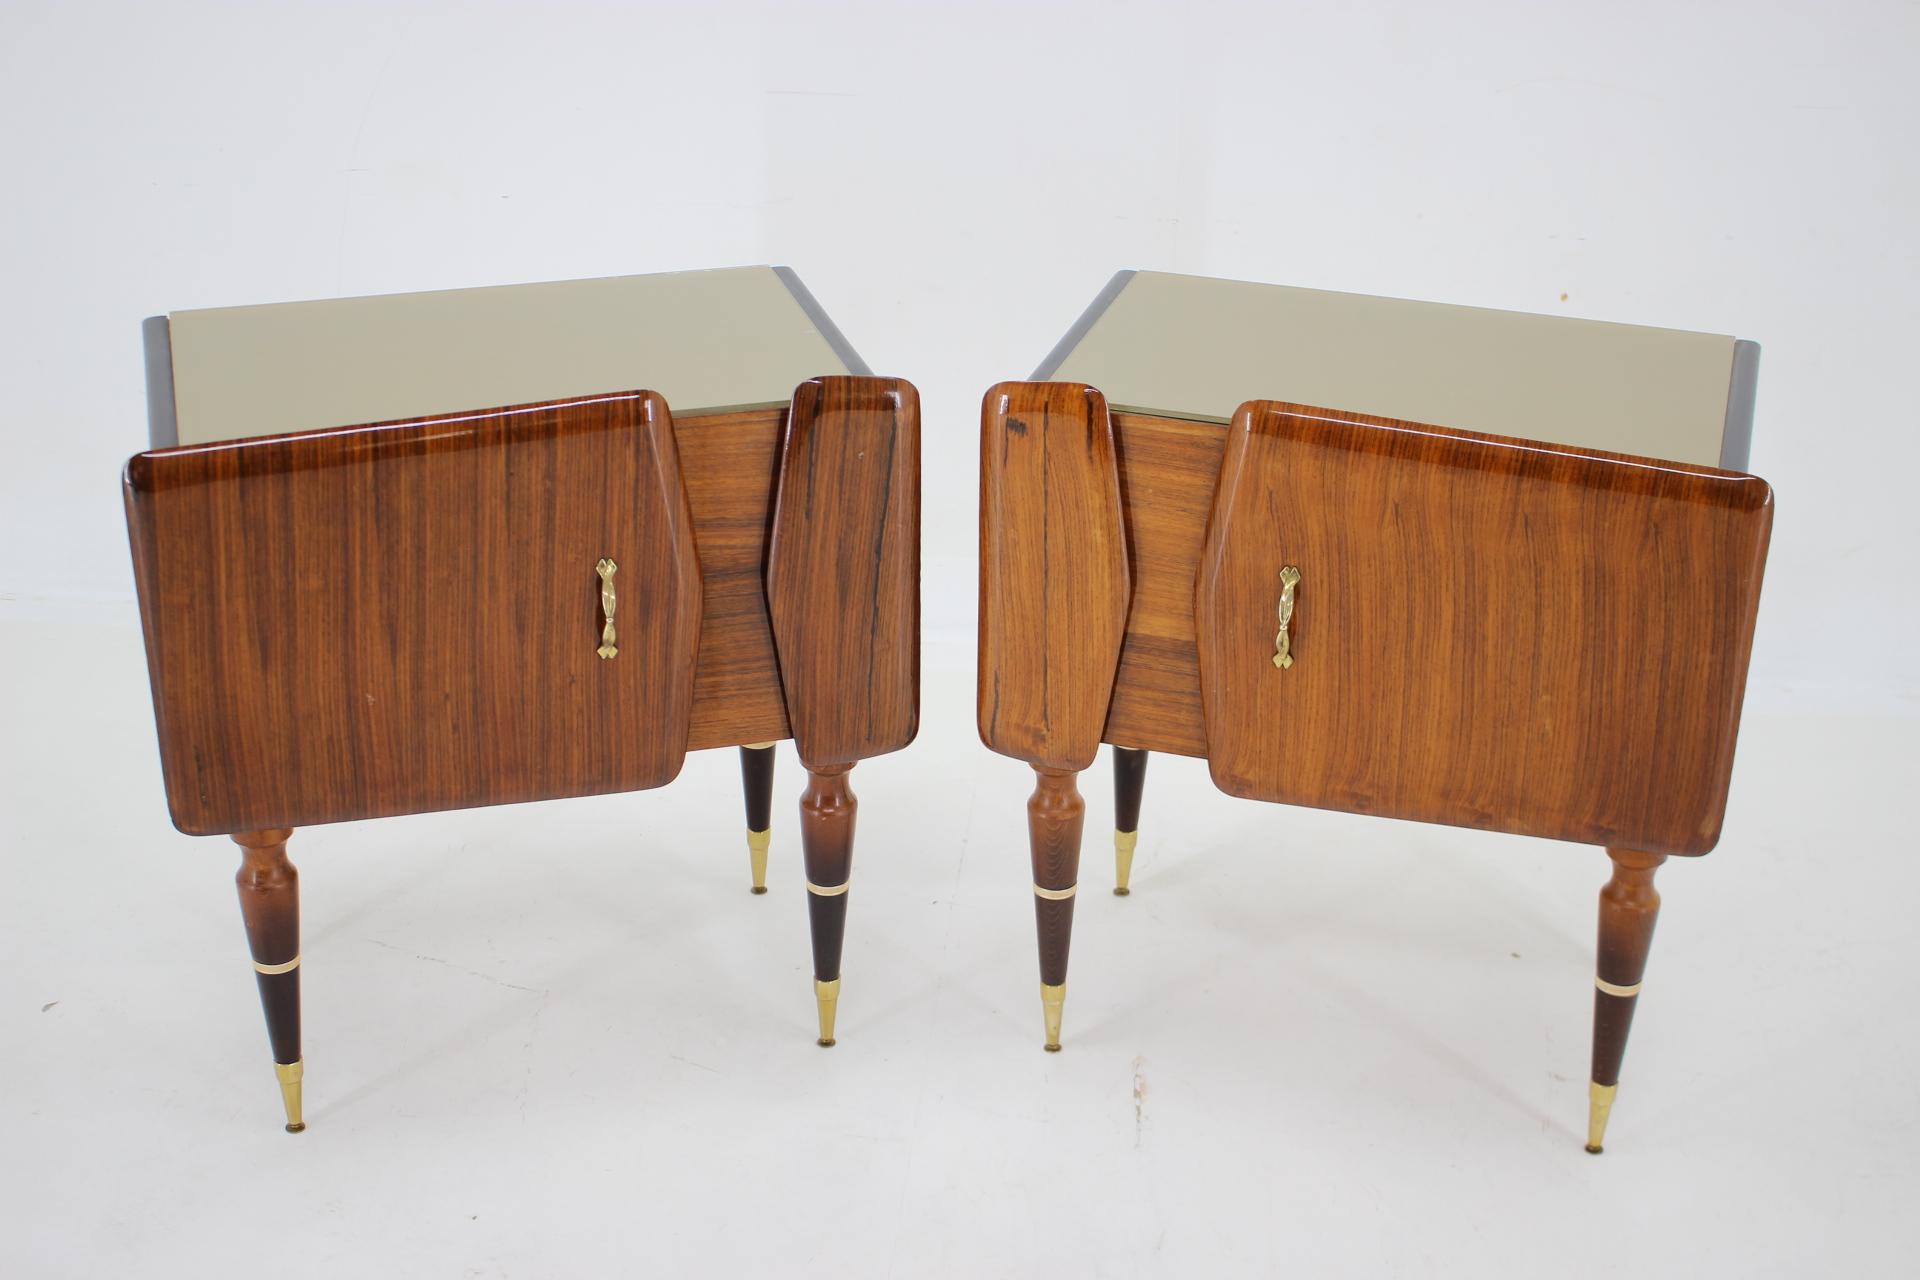 Italian 1960s Pair of Sculptural Wooden Bedside Tables, Italy For Sale